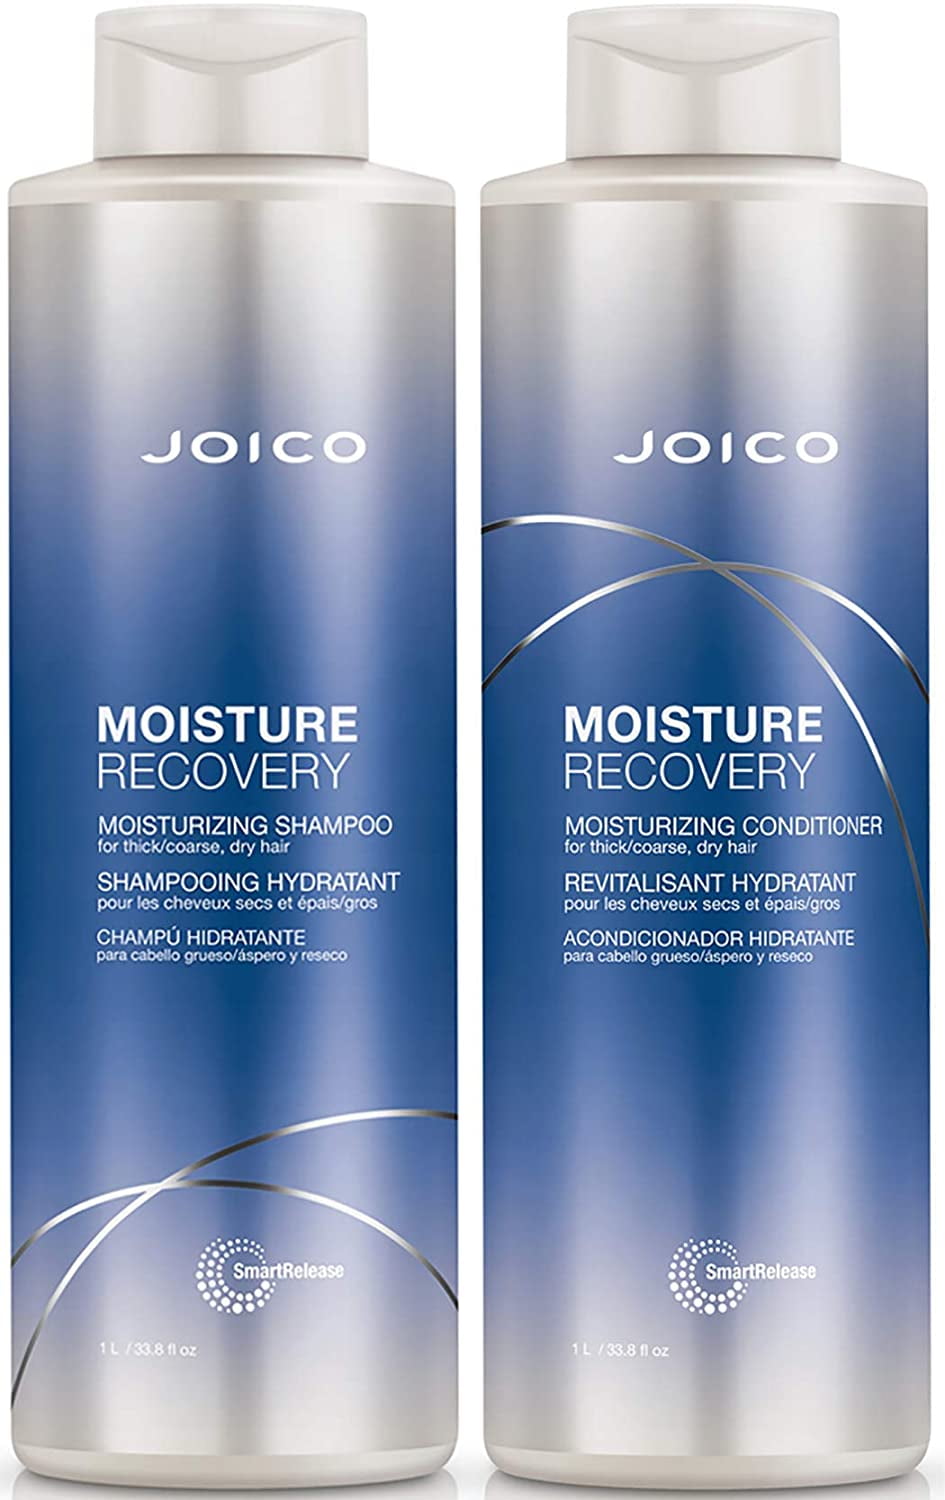 Joico Moisture Recovery Shampoo And Conditioner Liter Duo Set (33.8Oz) New  Look